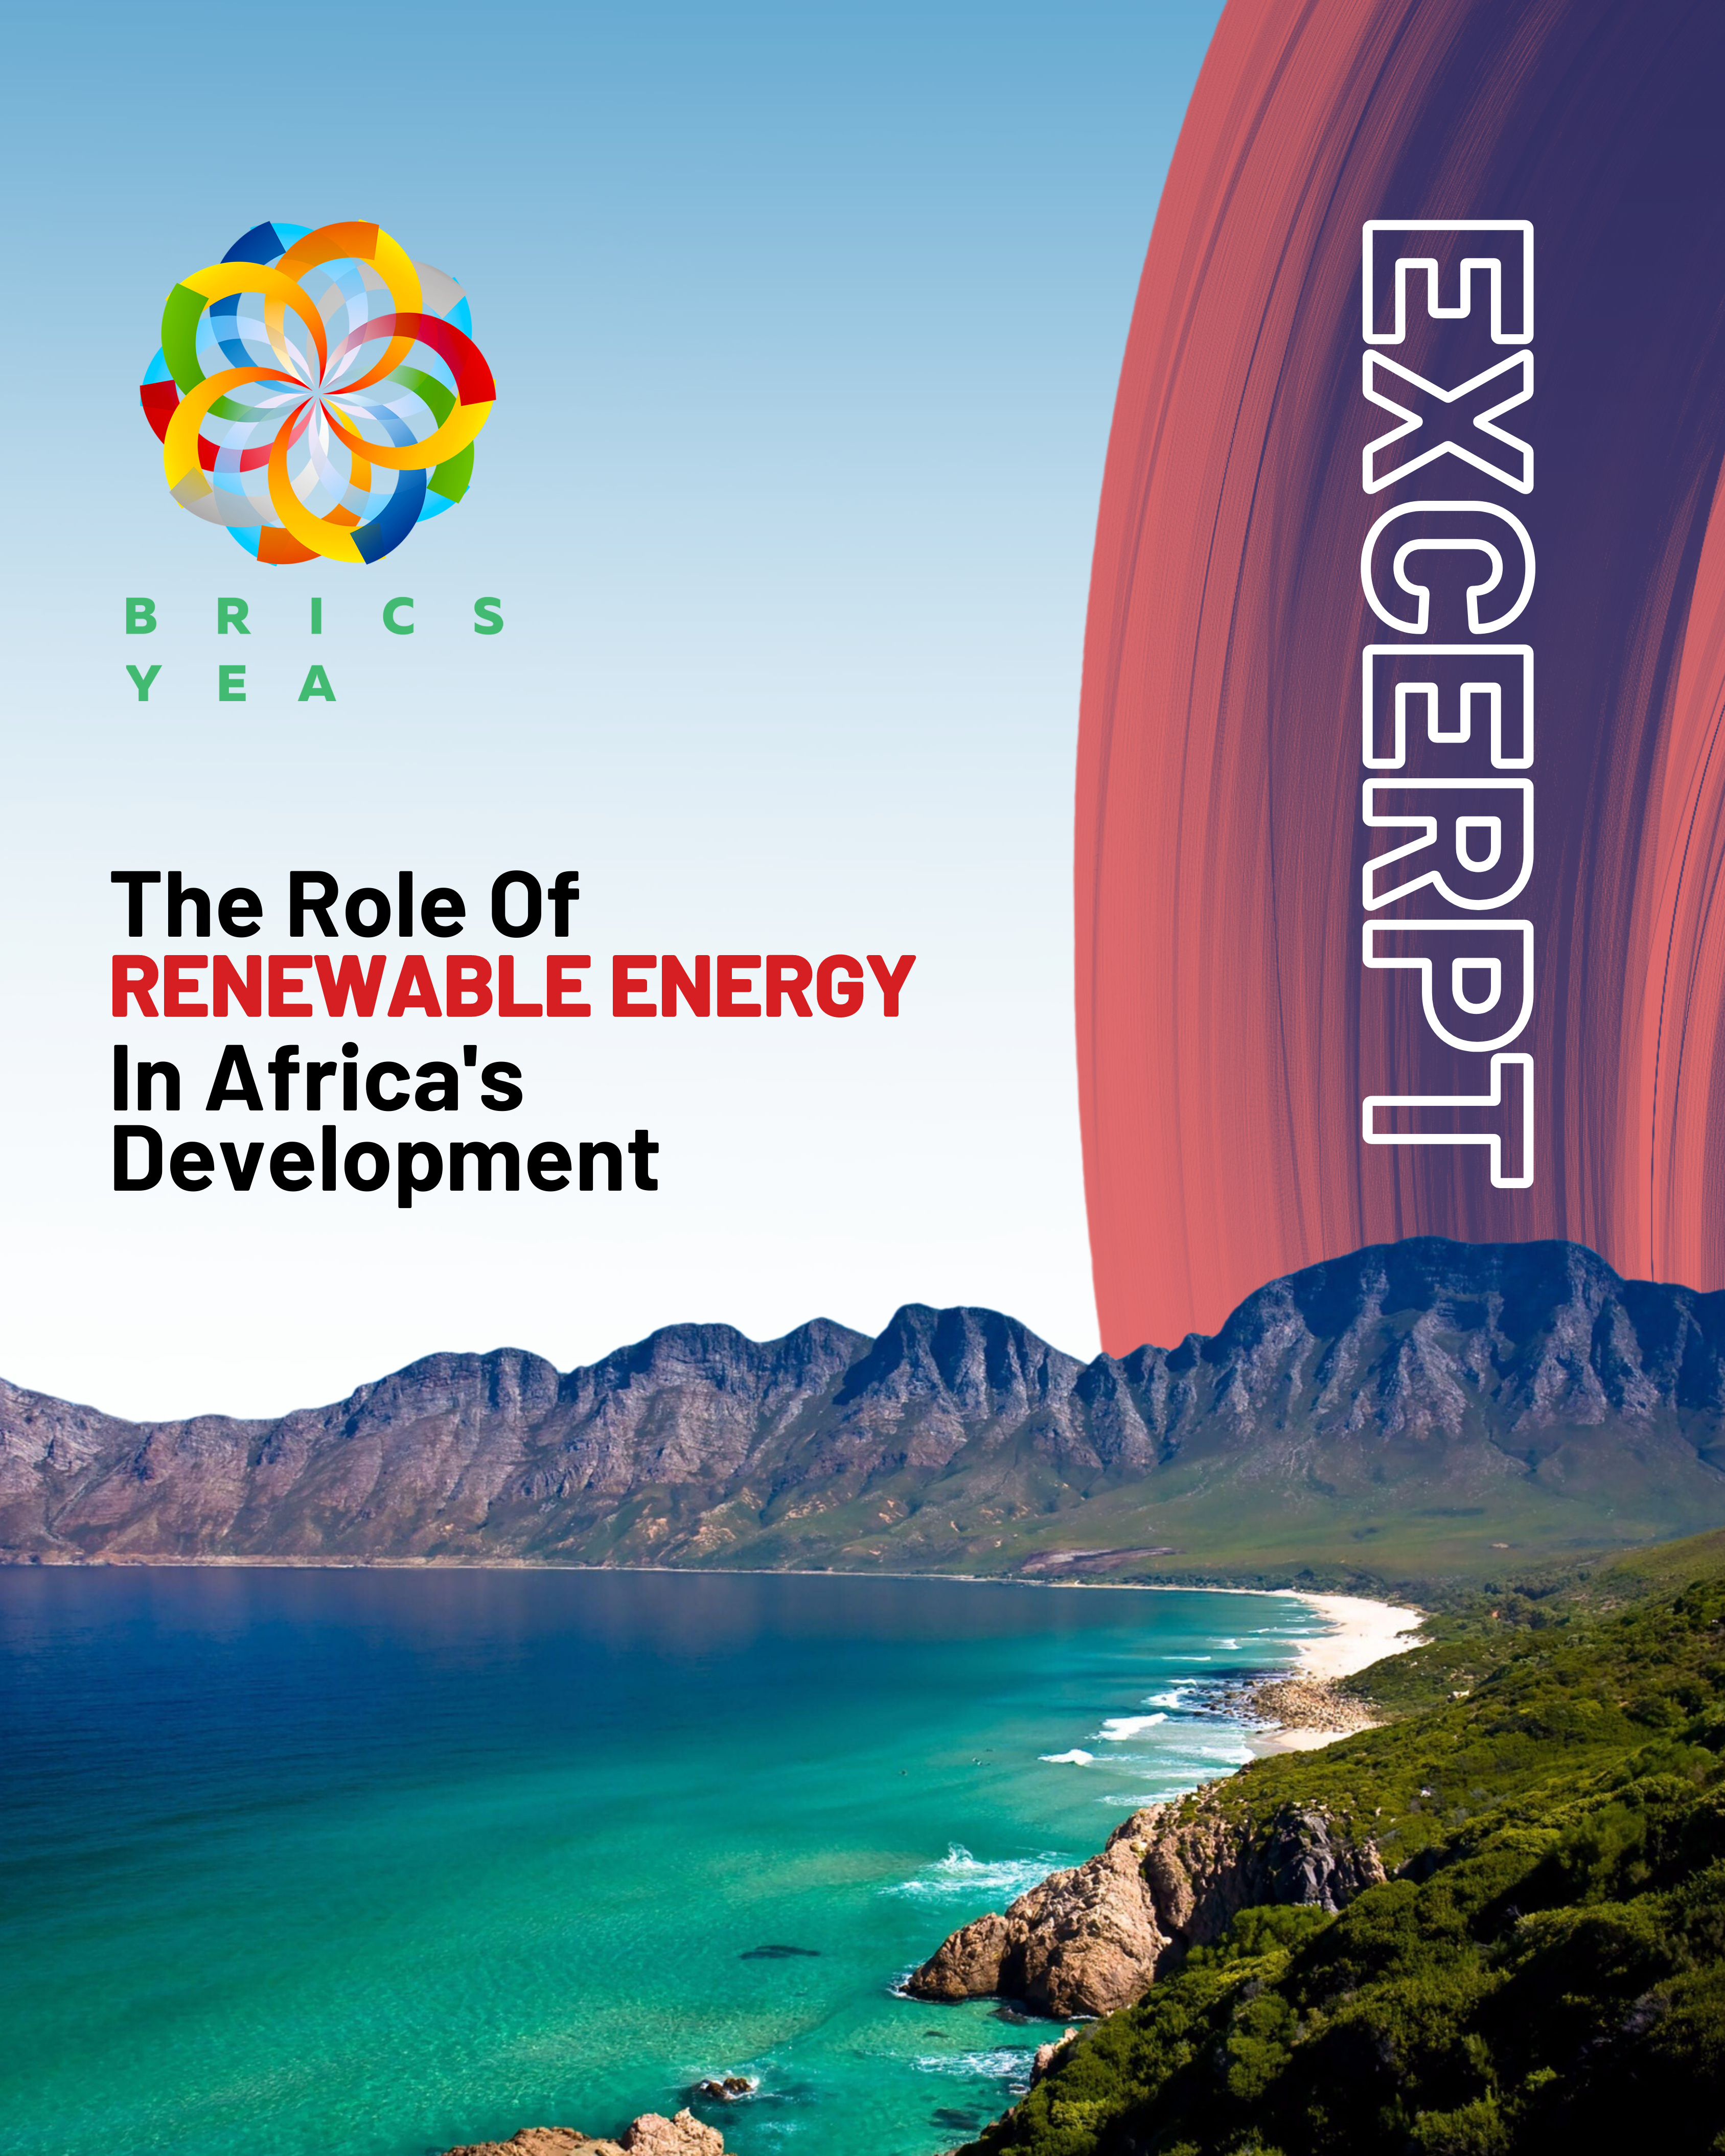 The Role of Renewable Energy in Africa's Development